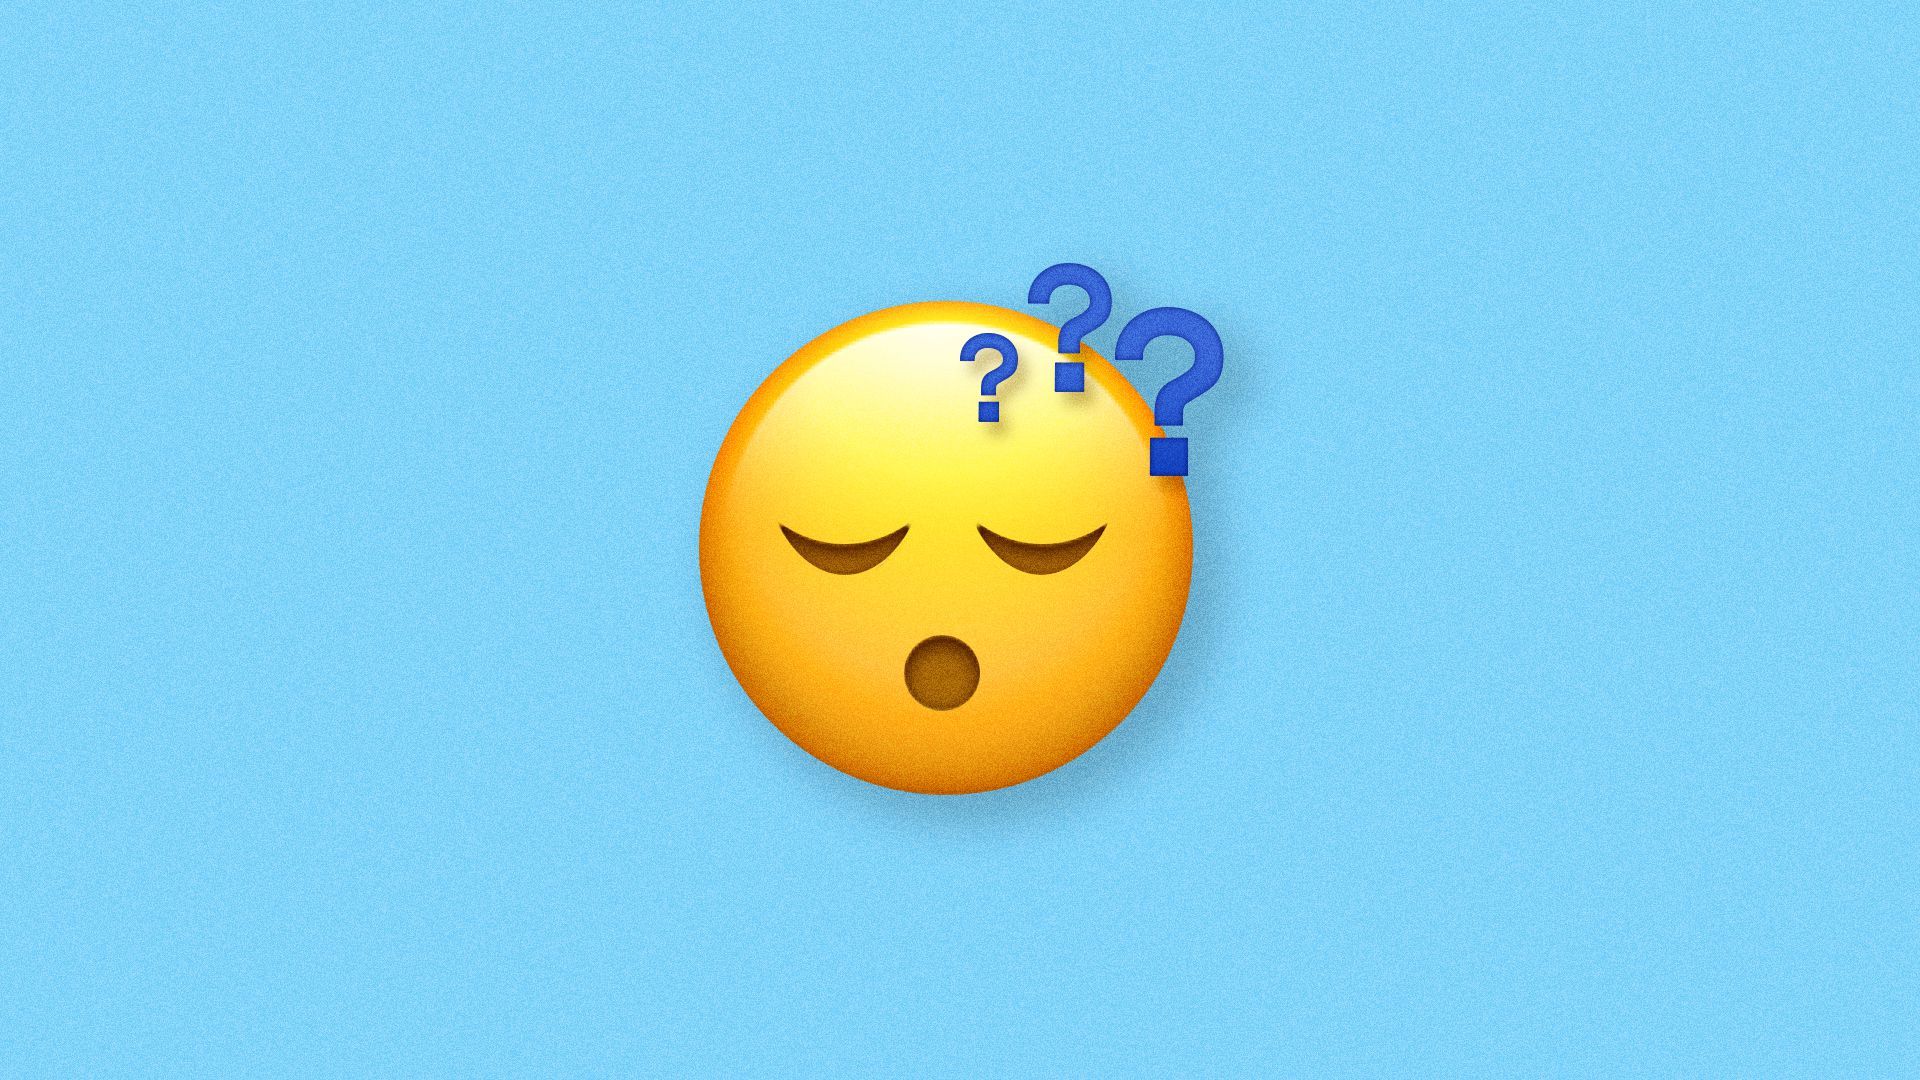 Illustration of a sleeping emojis, but the zzz's are replaced with question marks. 